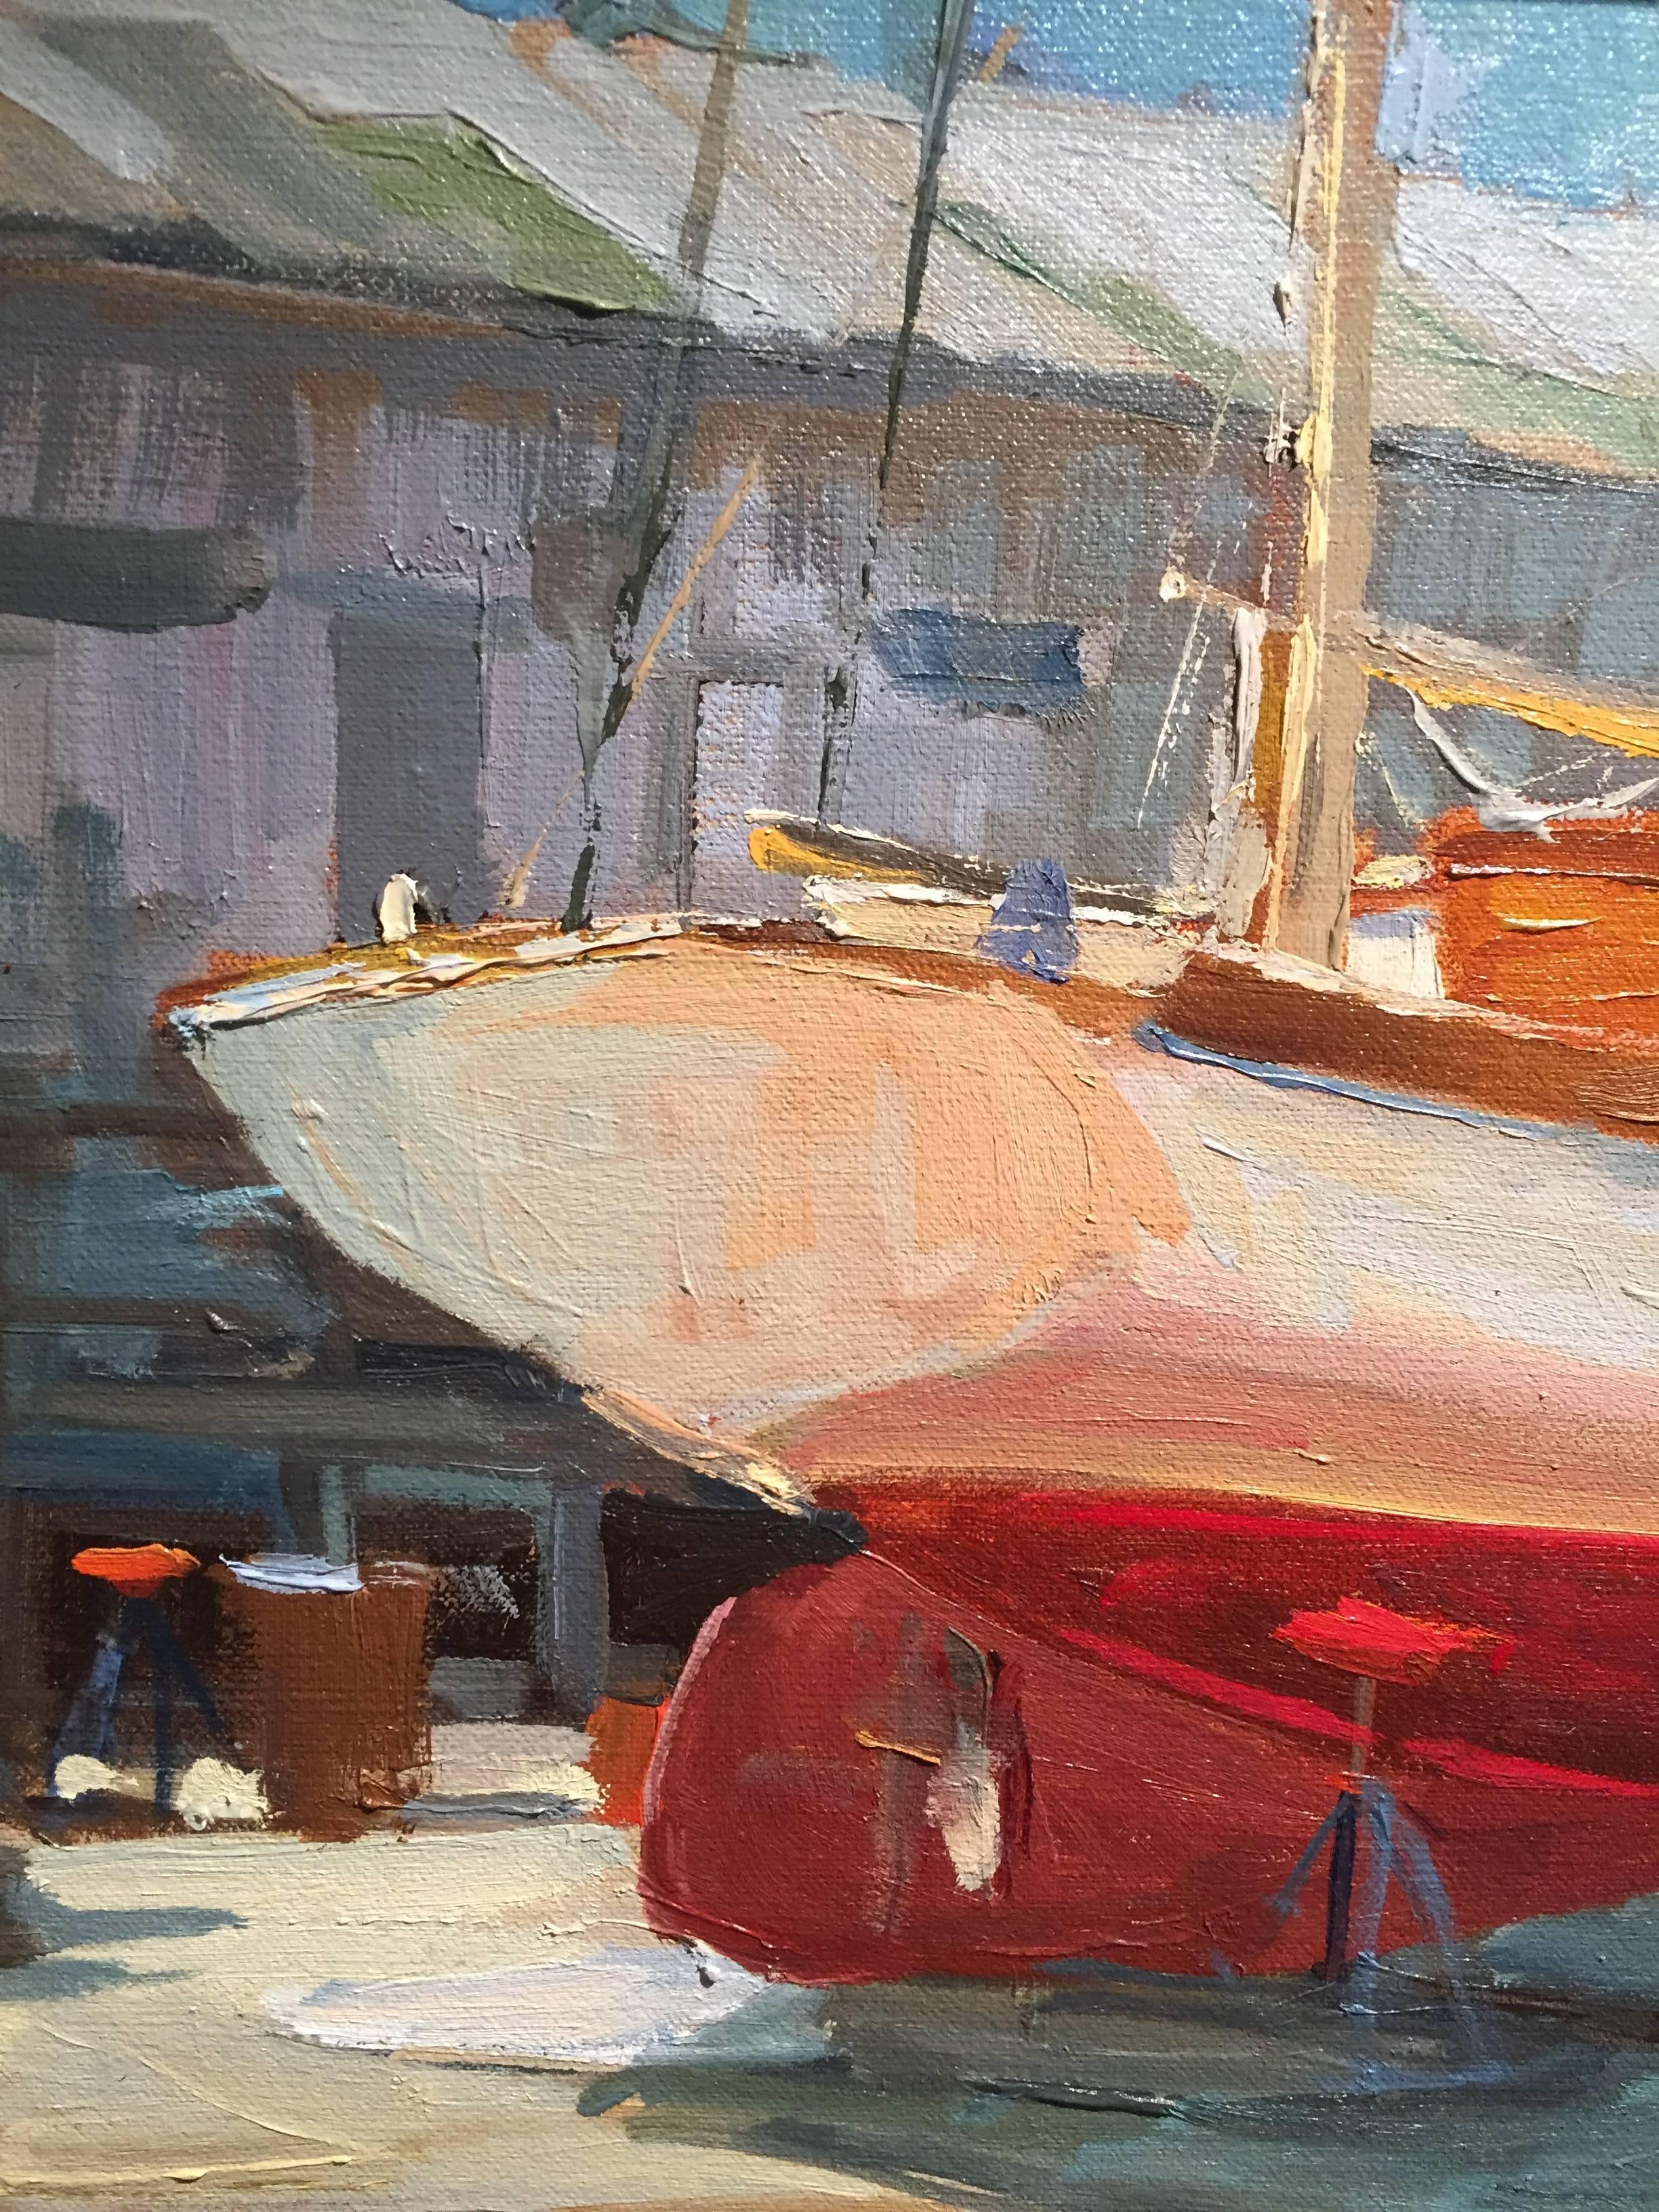 Coqueze Springs, New York was painted en plein-air at a ship-yard in Springs, East Hampton, New York. A Red and white sailboat sits mounted on land, not yet ready to be placed in its destined waters. 

Thomas Cardone was born in New York in 1964. He